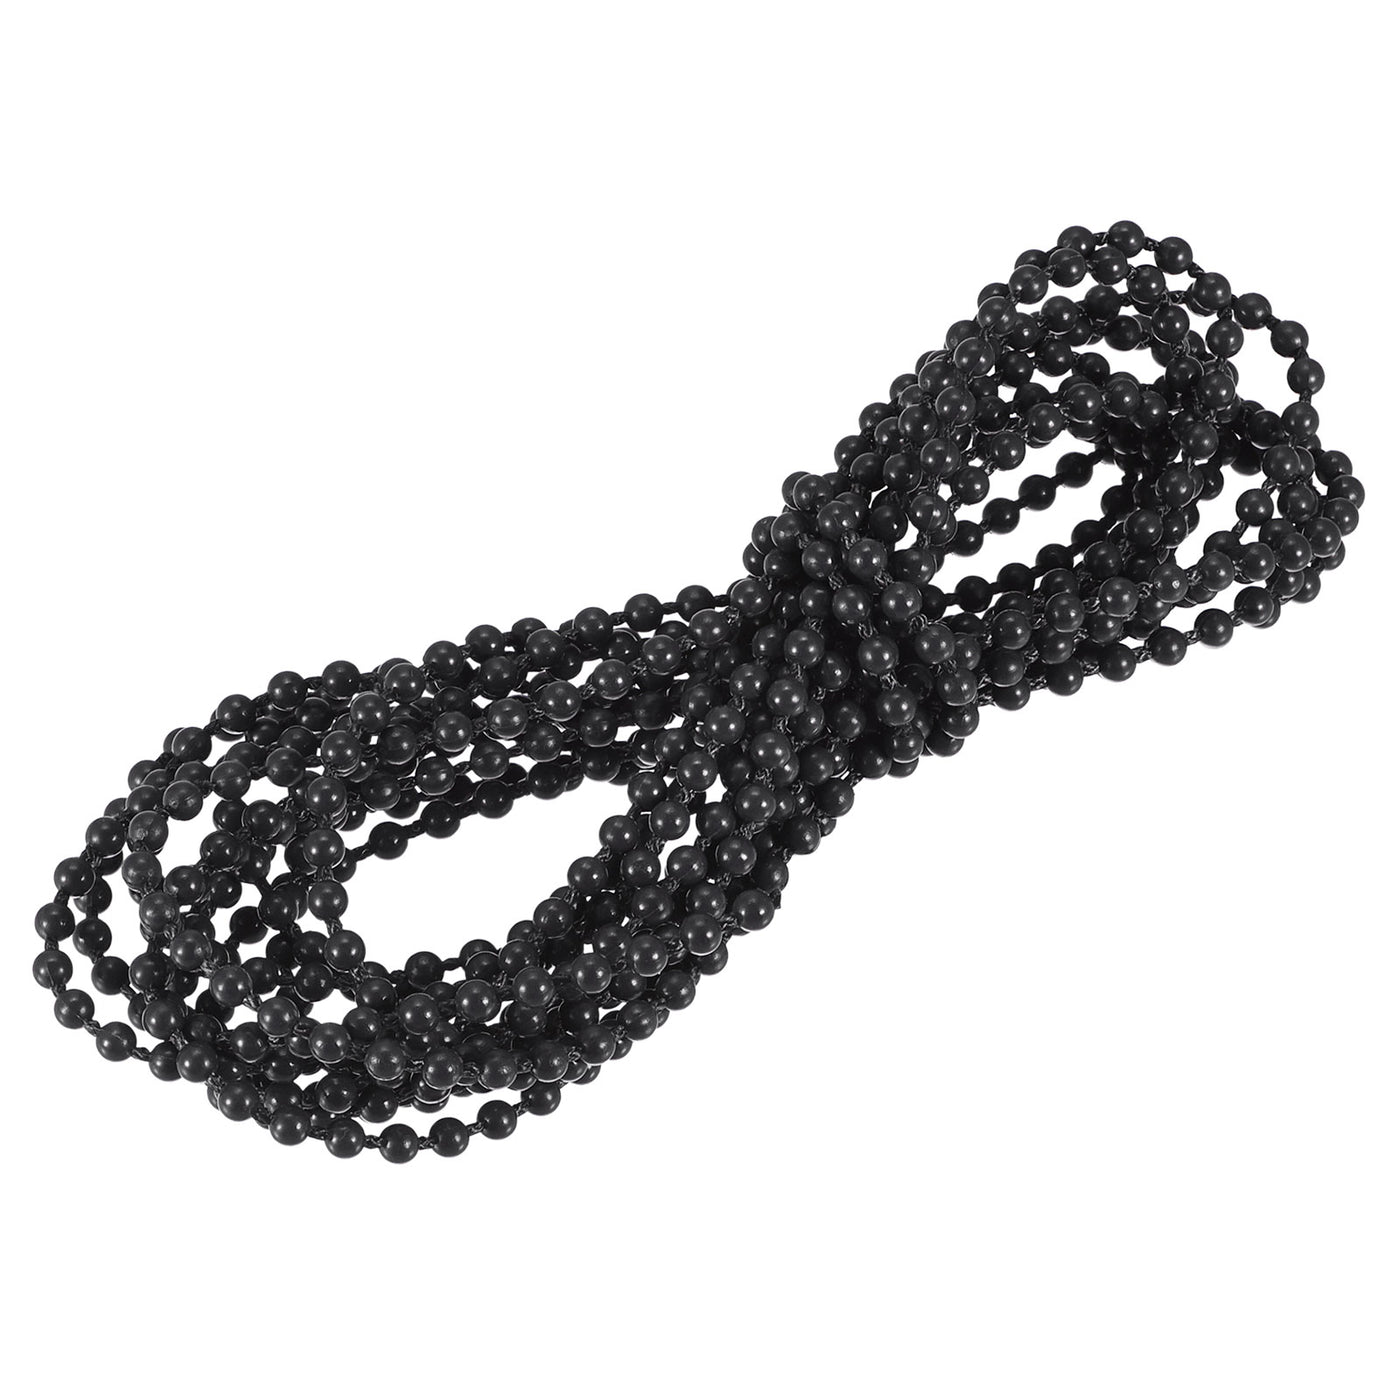 uxcell Uxcell 4.37 Yards Blinds Beaded Chain Roller Shade Cord for Window Repair Parts, Black